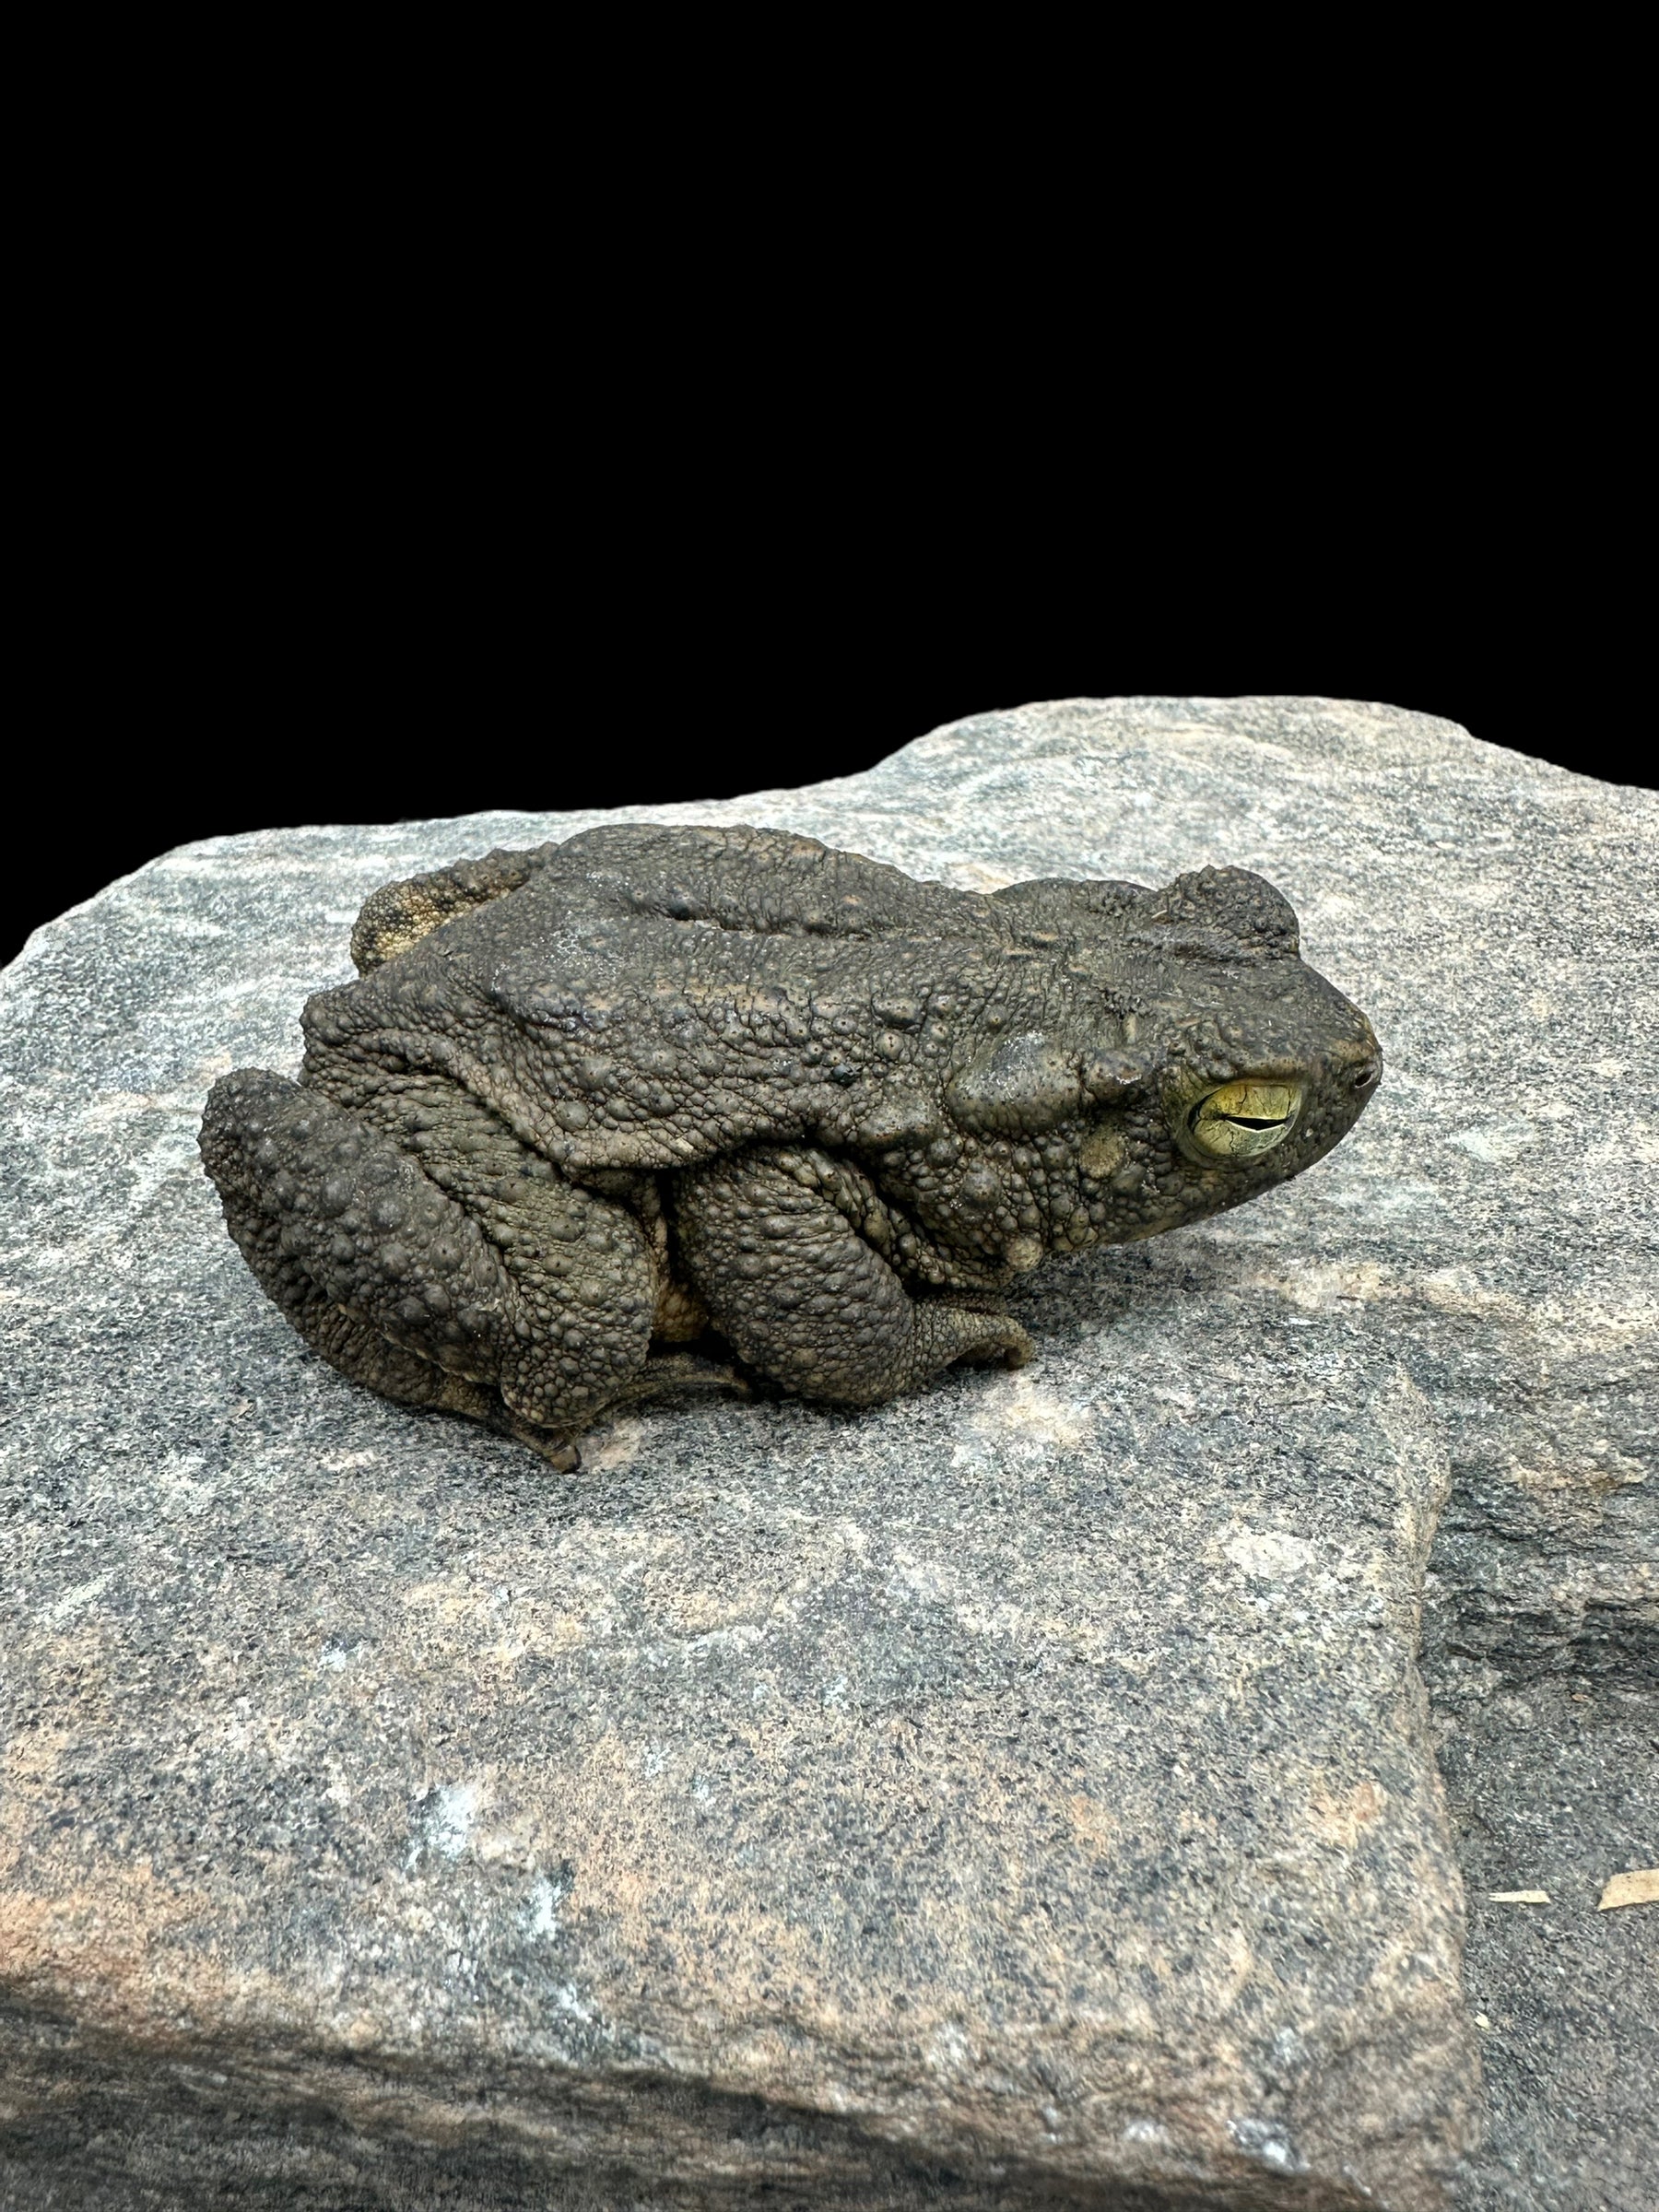 Giant Asian River Toad